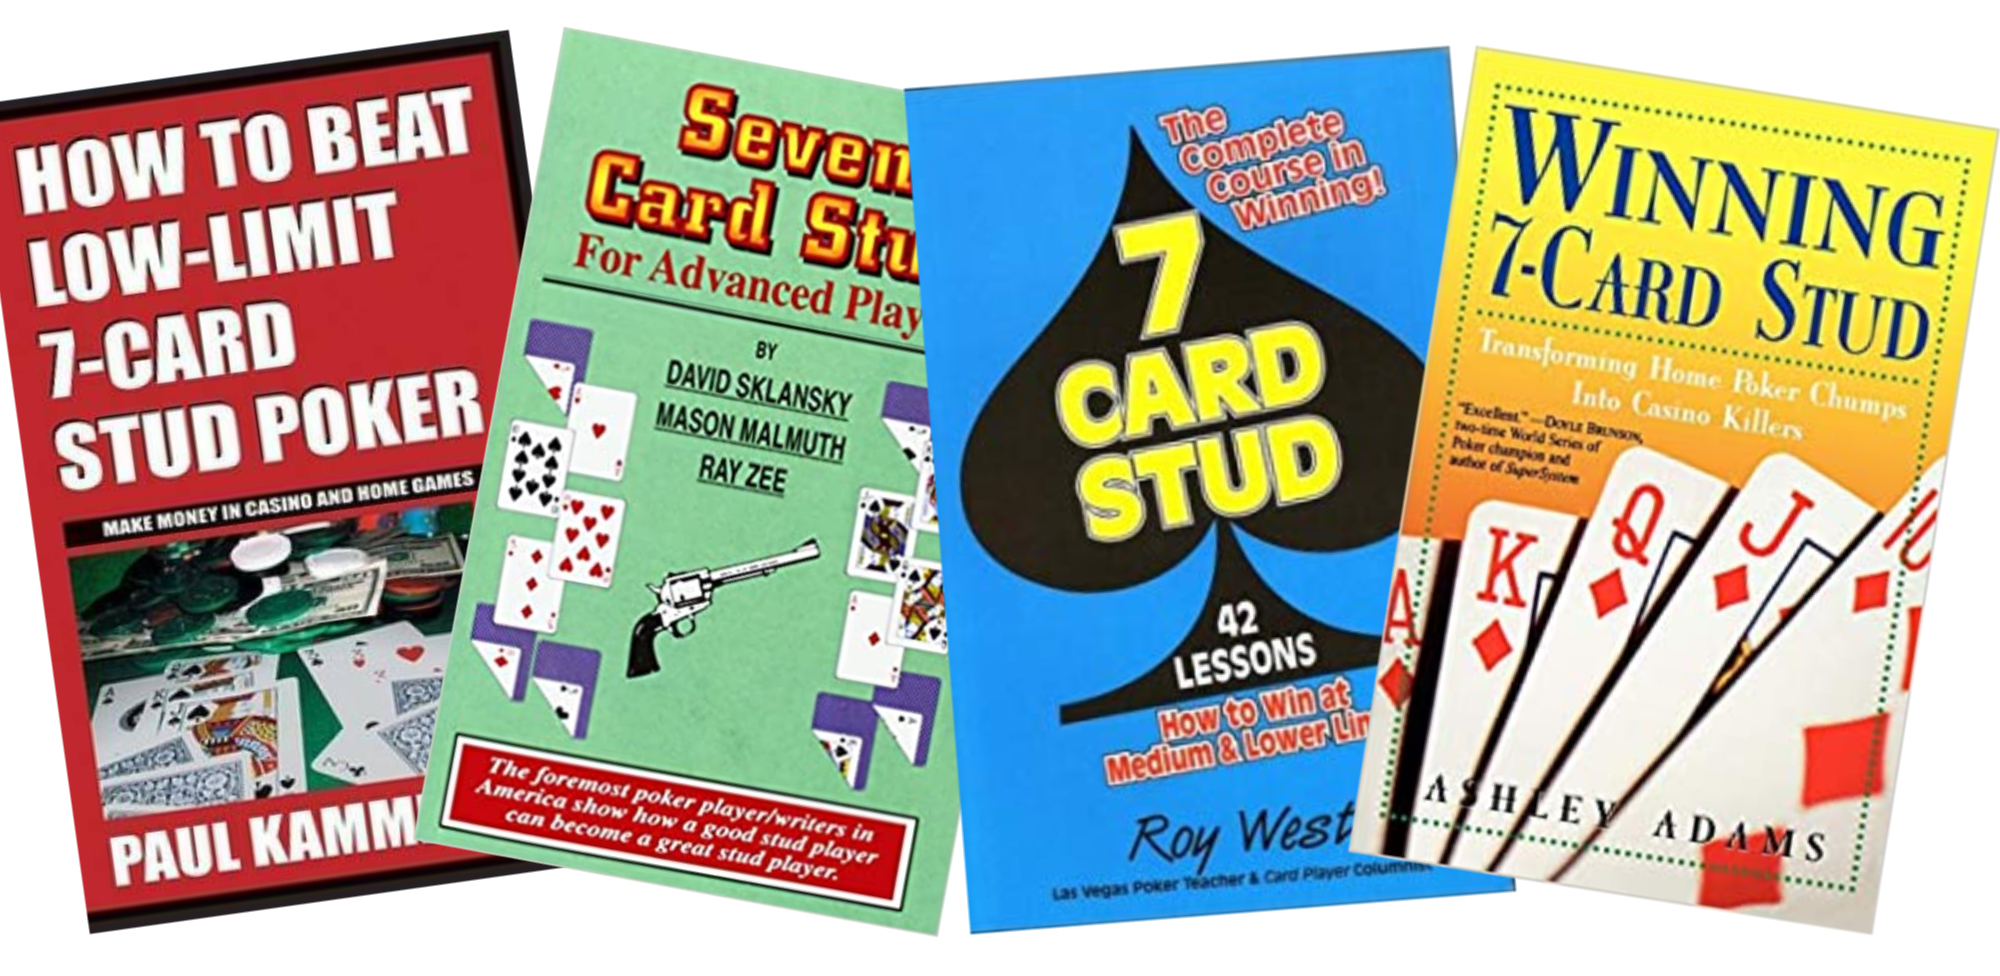 3 Aggressive Moves to Take Your 7-Card Stud Game Up a Level